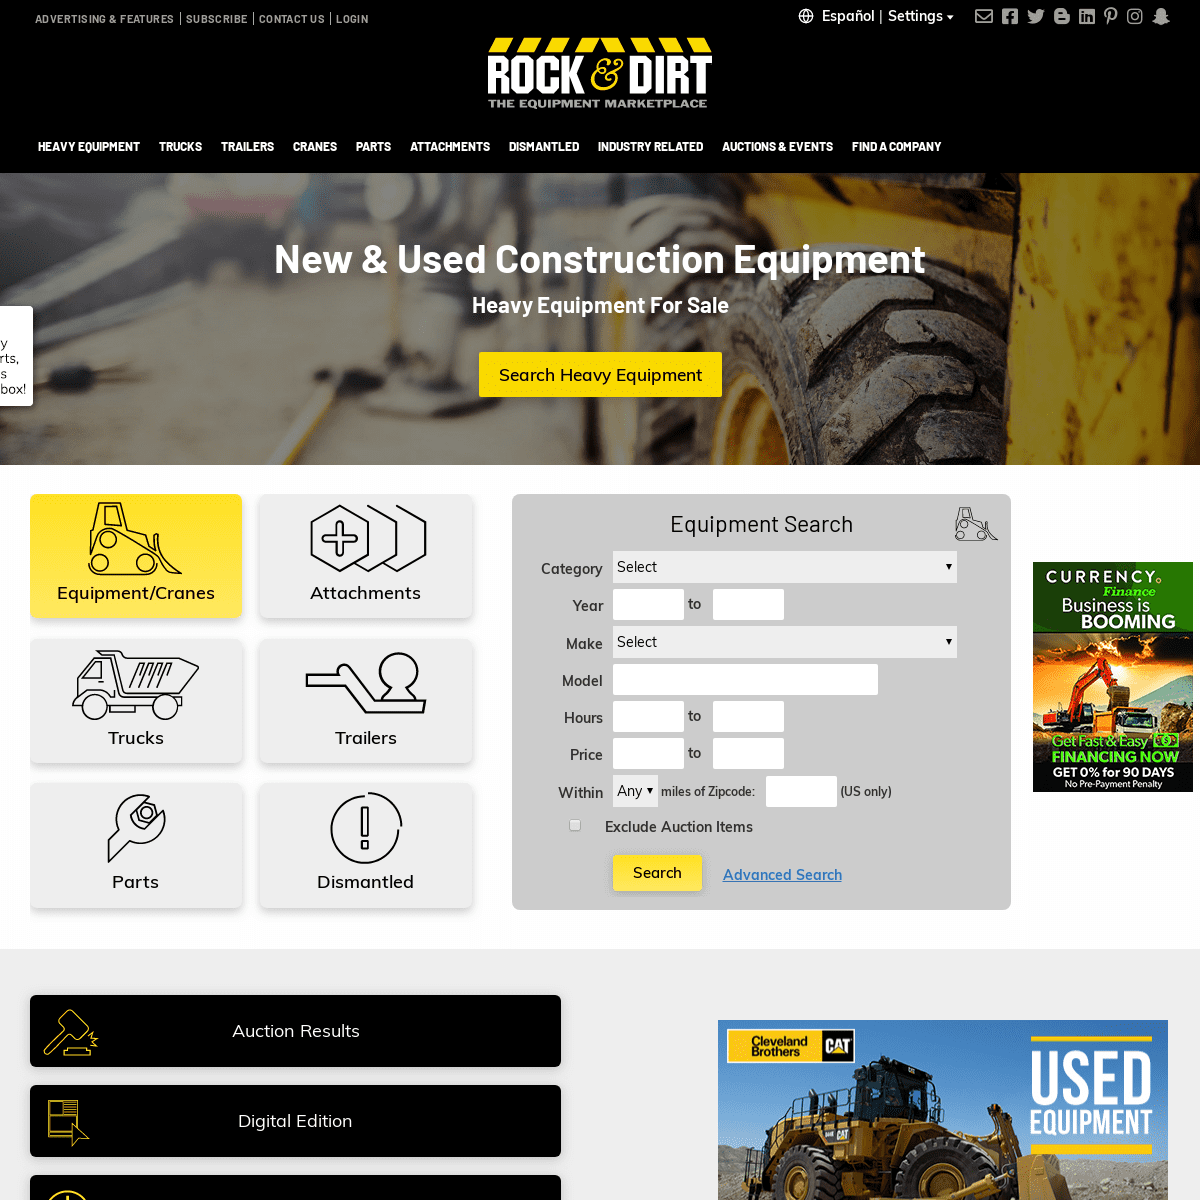 Construction Equipment - Find  New & Used Construction Equipment & Heavy Machinery | Rock & Dirt